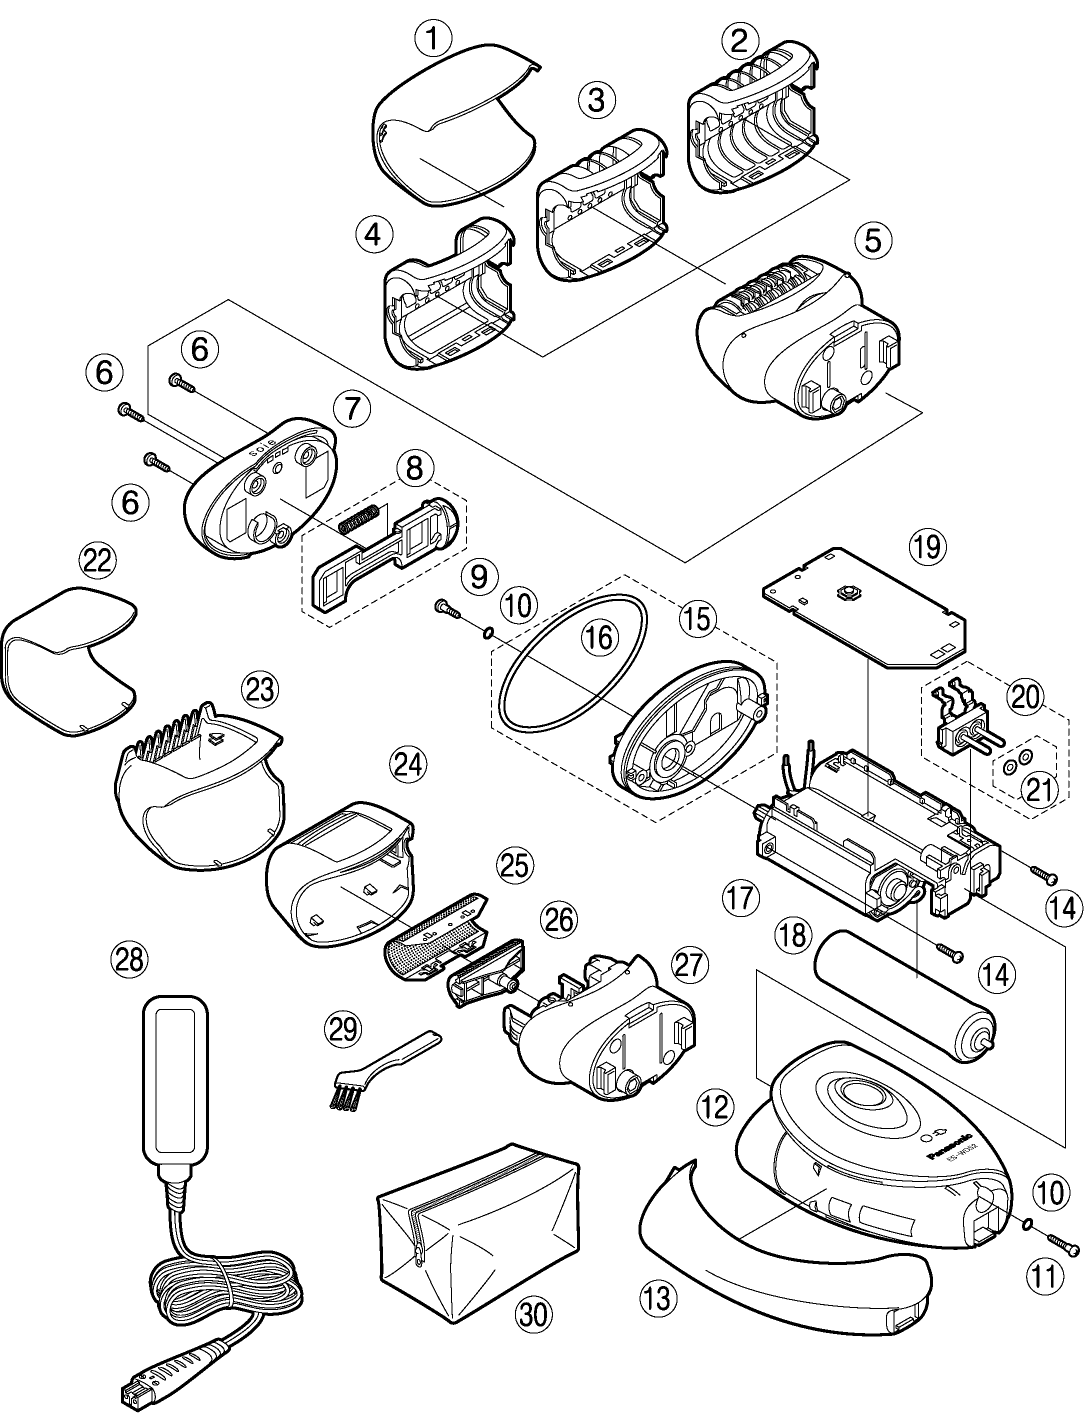 ES-WD52: Exploded View